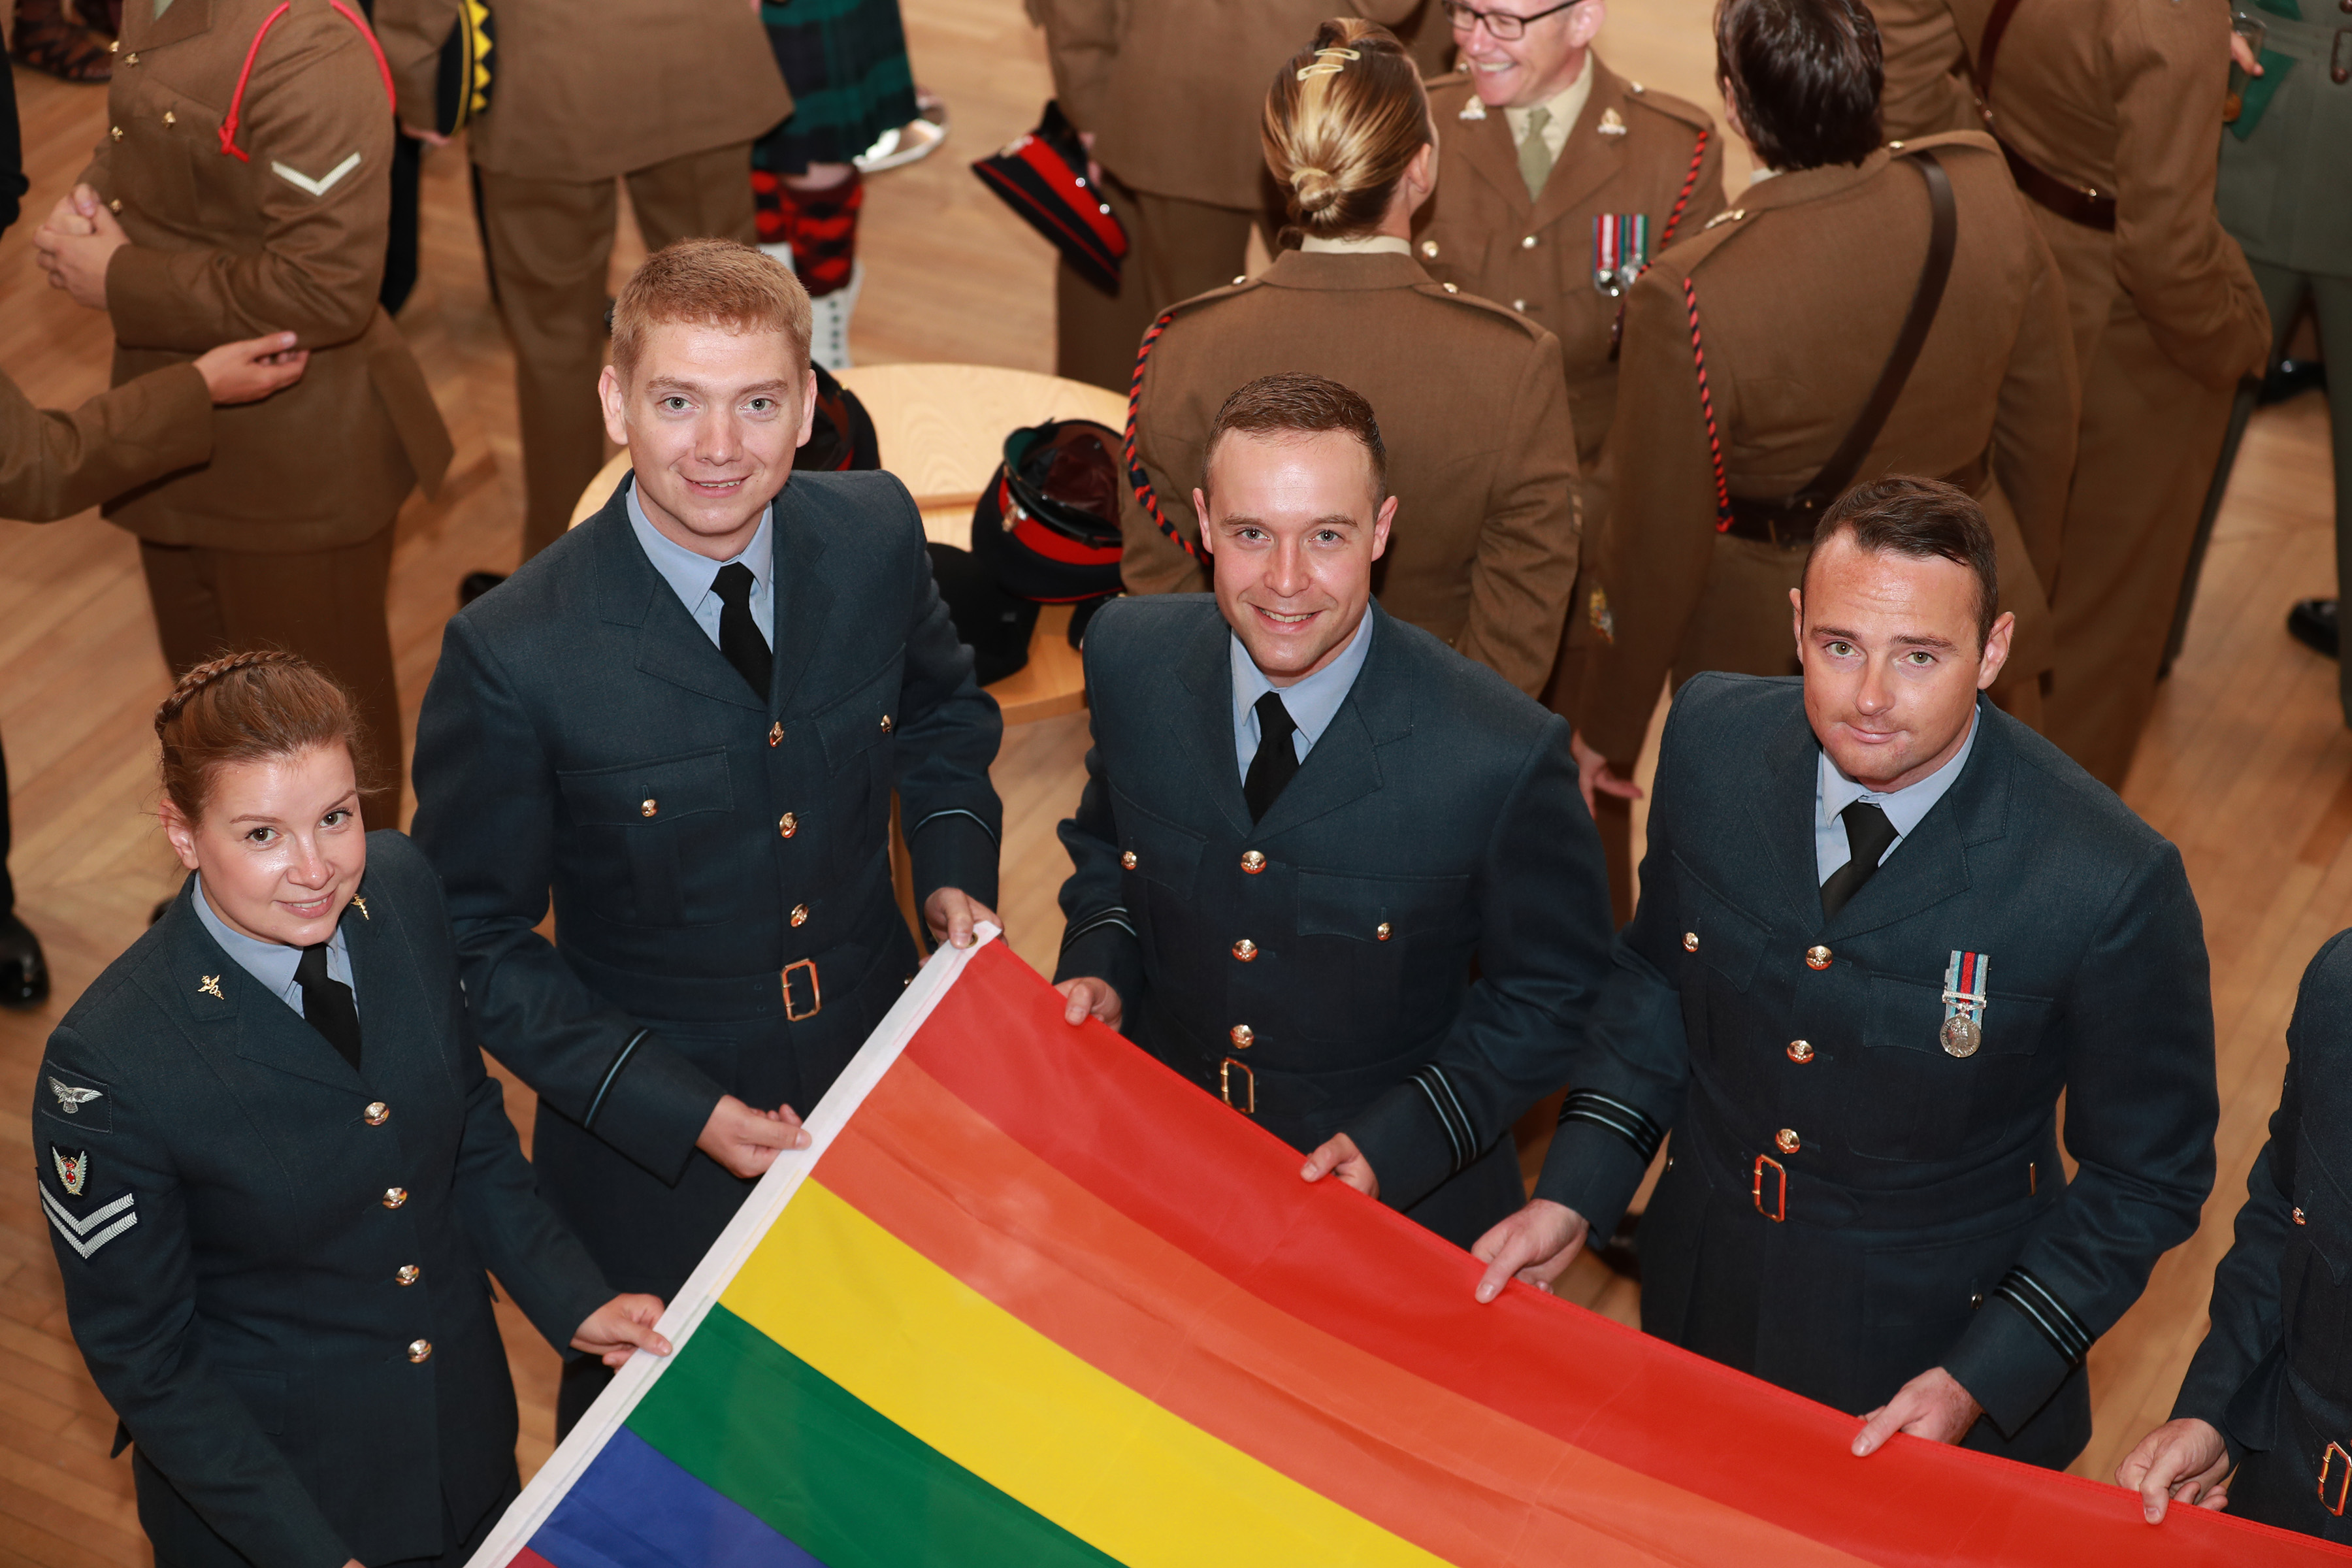 RAF Personnel hold an LGBT+ flag.